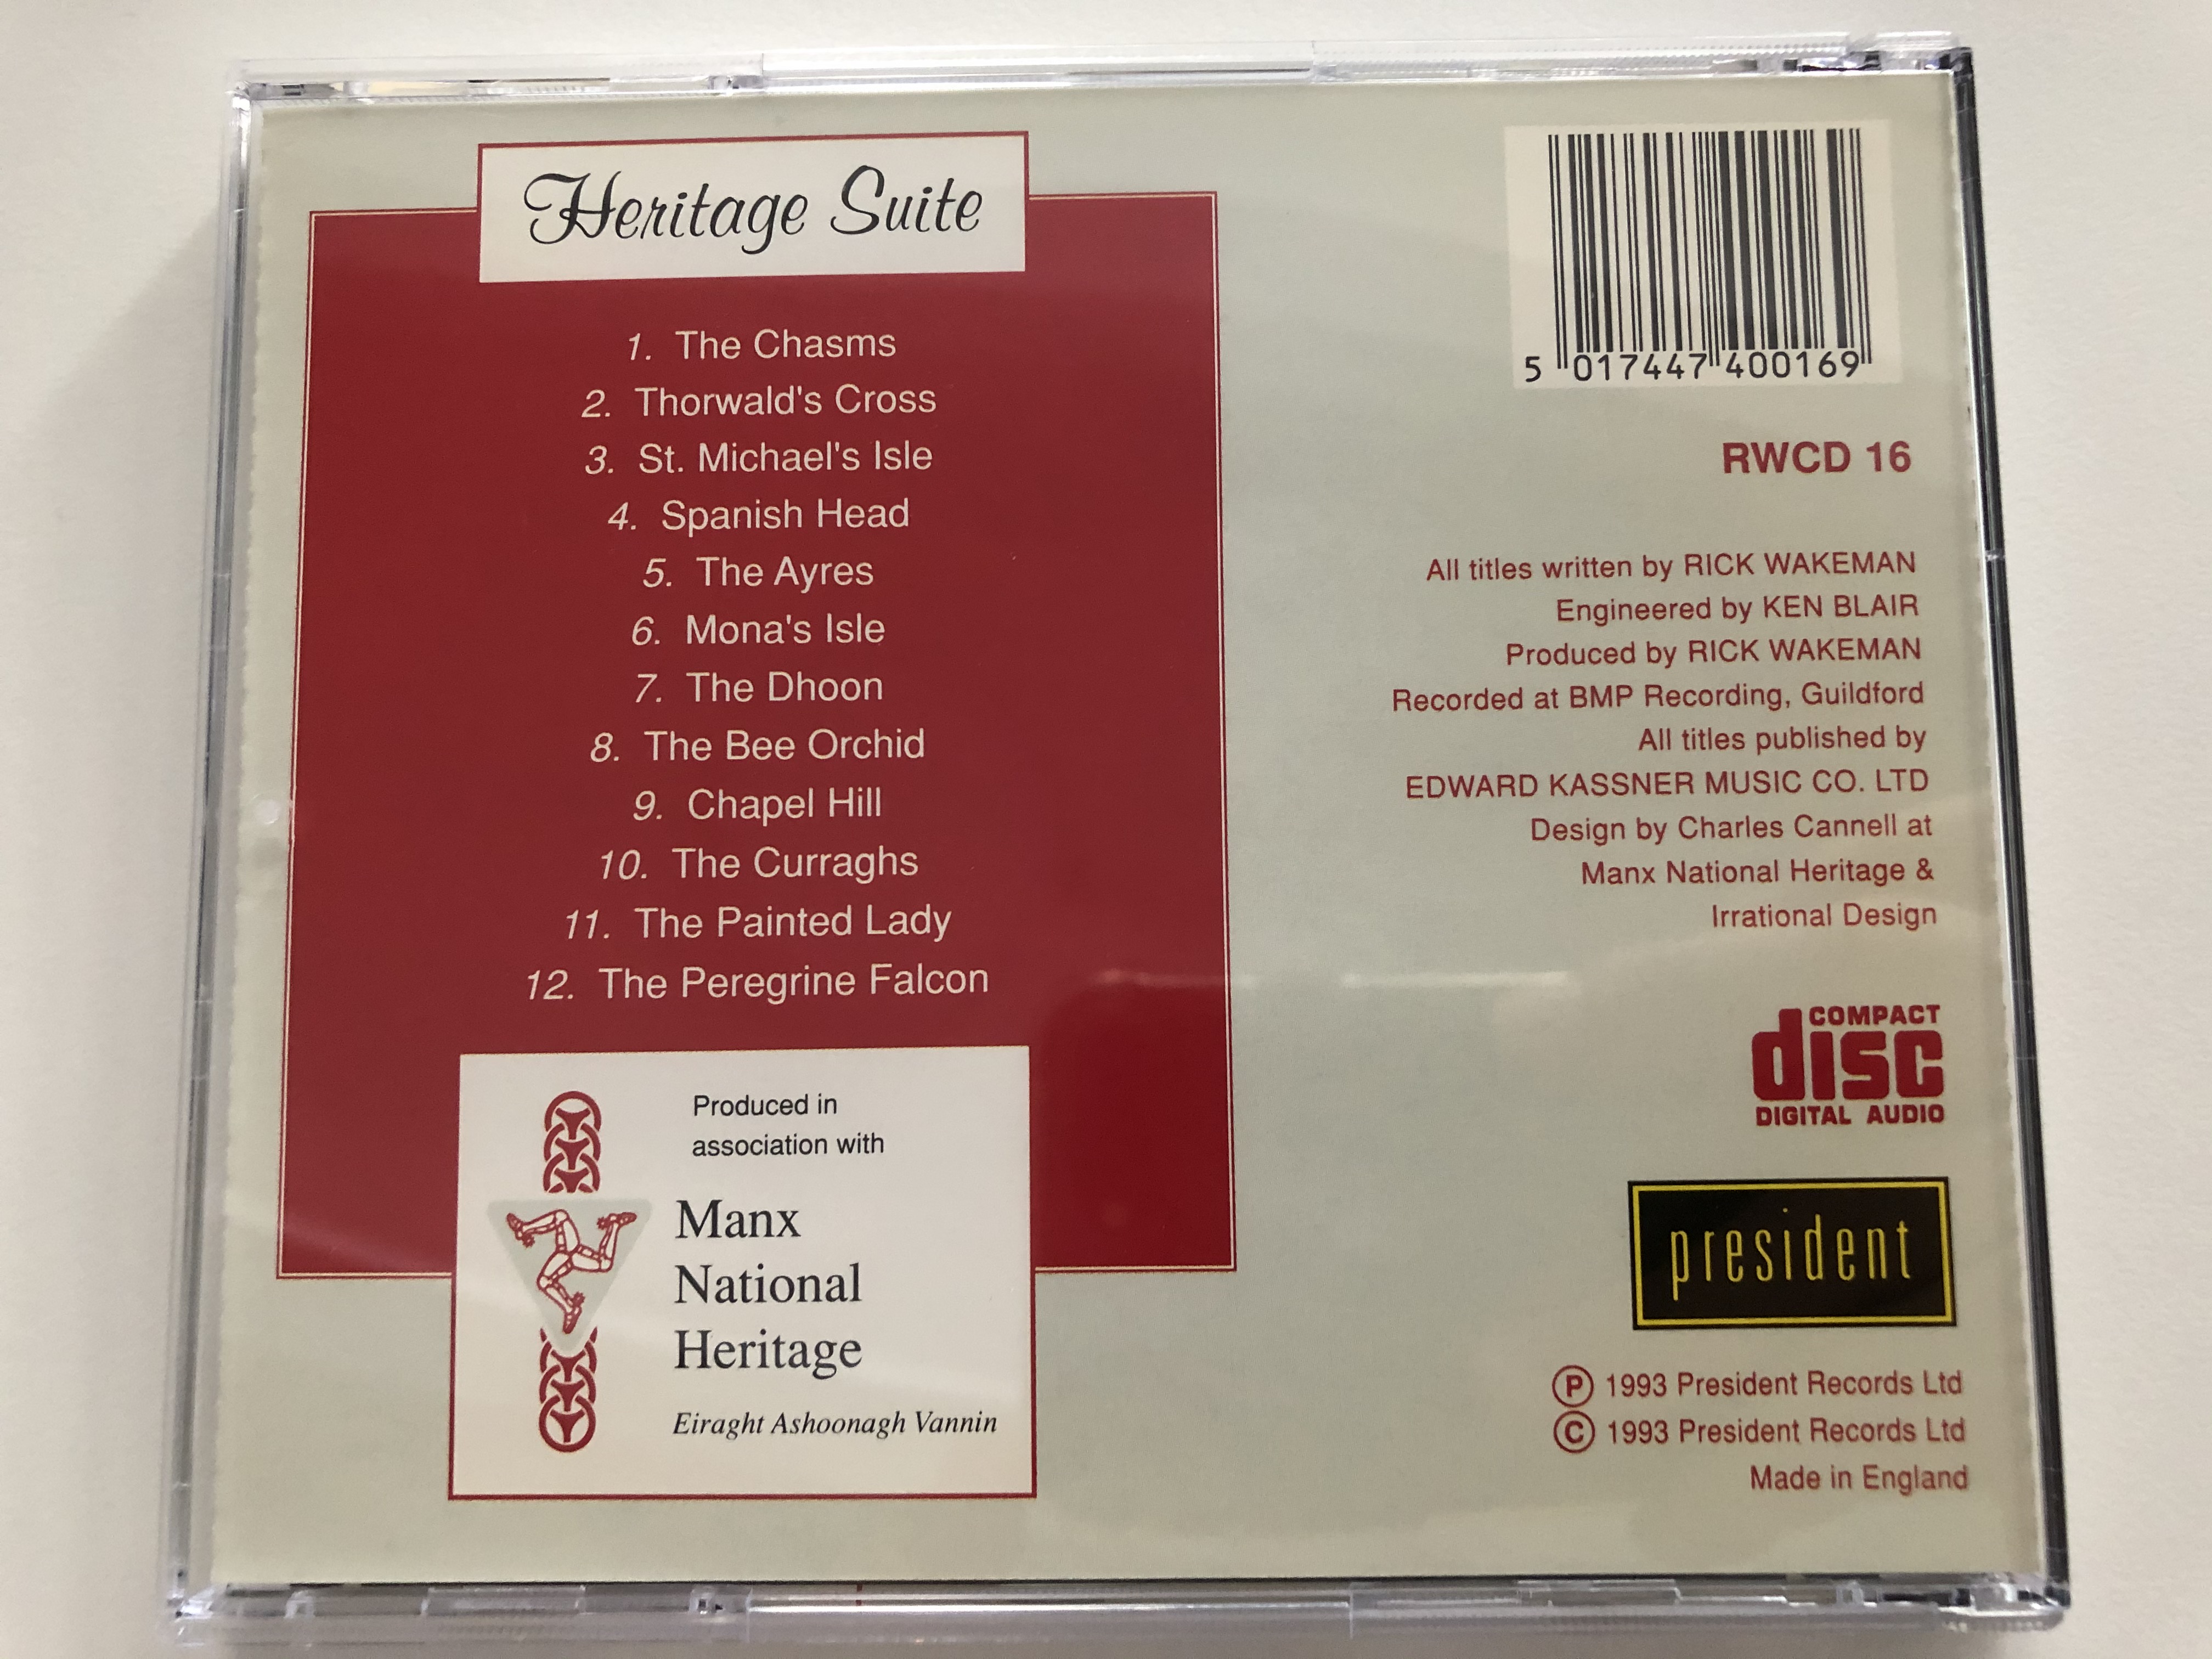 rick-wakeman-heritage-suite-a-tribute-to-the-unique-heritage-of-the-isle-of-man-president-records-audio-cd-1993-rwcd-16-4-.jpg